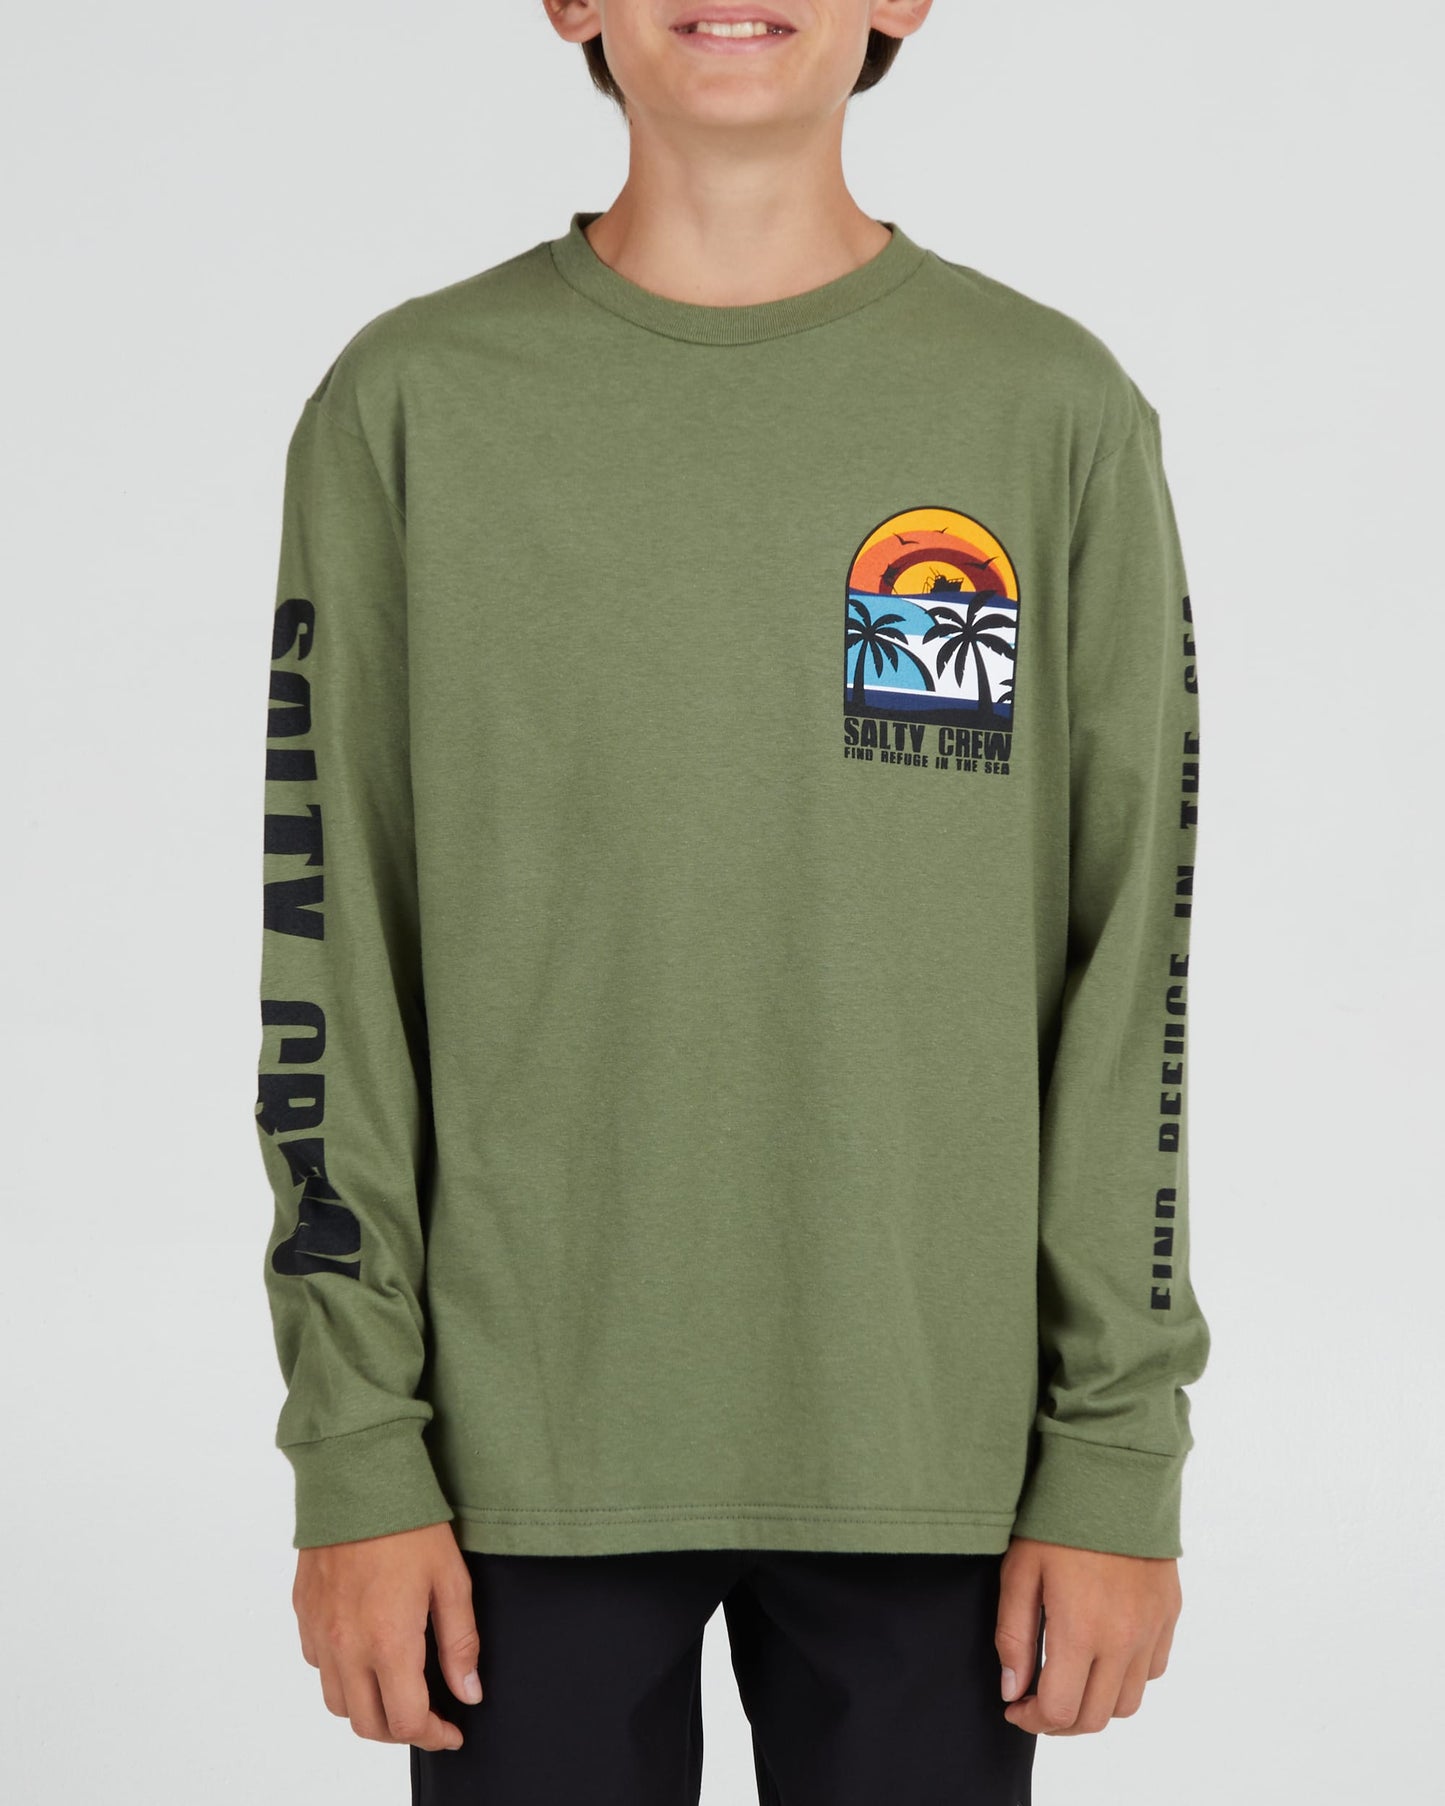 Salty crew T-SHIRTS L/S BEACH DAY BOYS L/S TEE - Sage green in Sage green